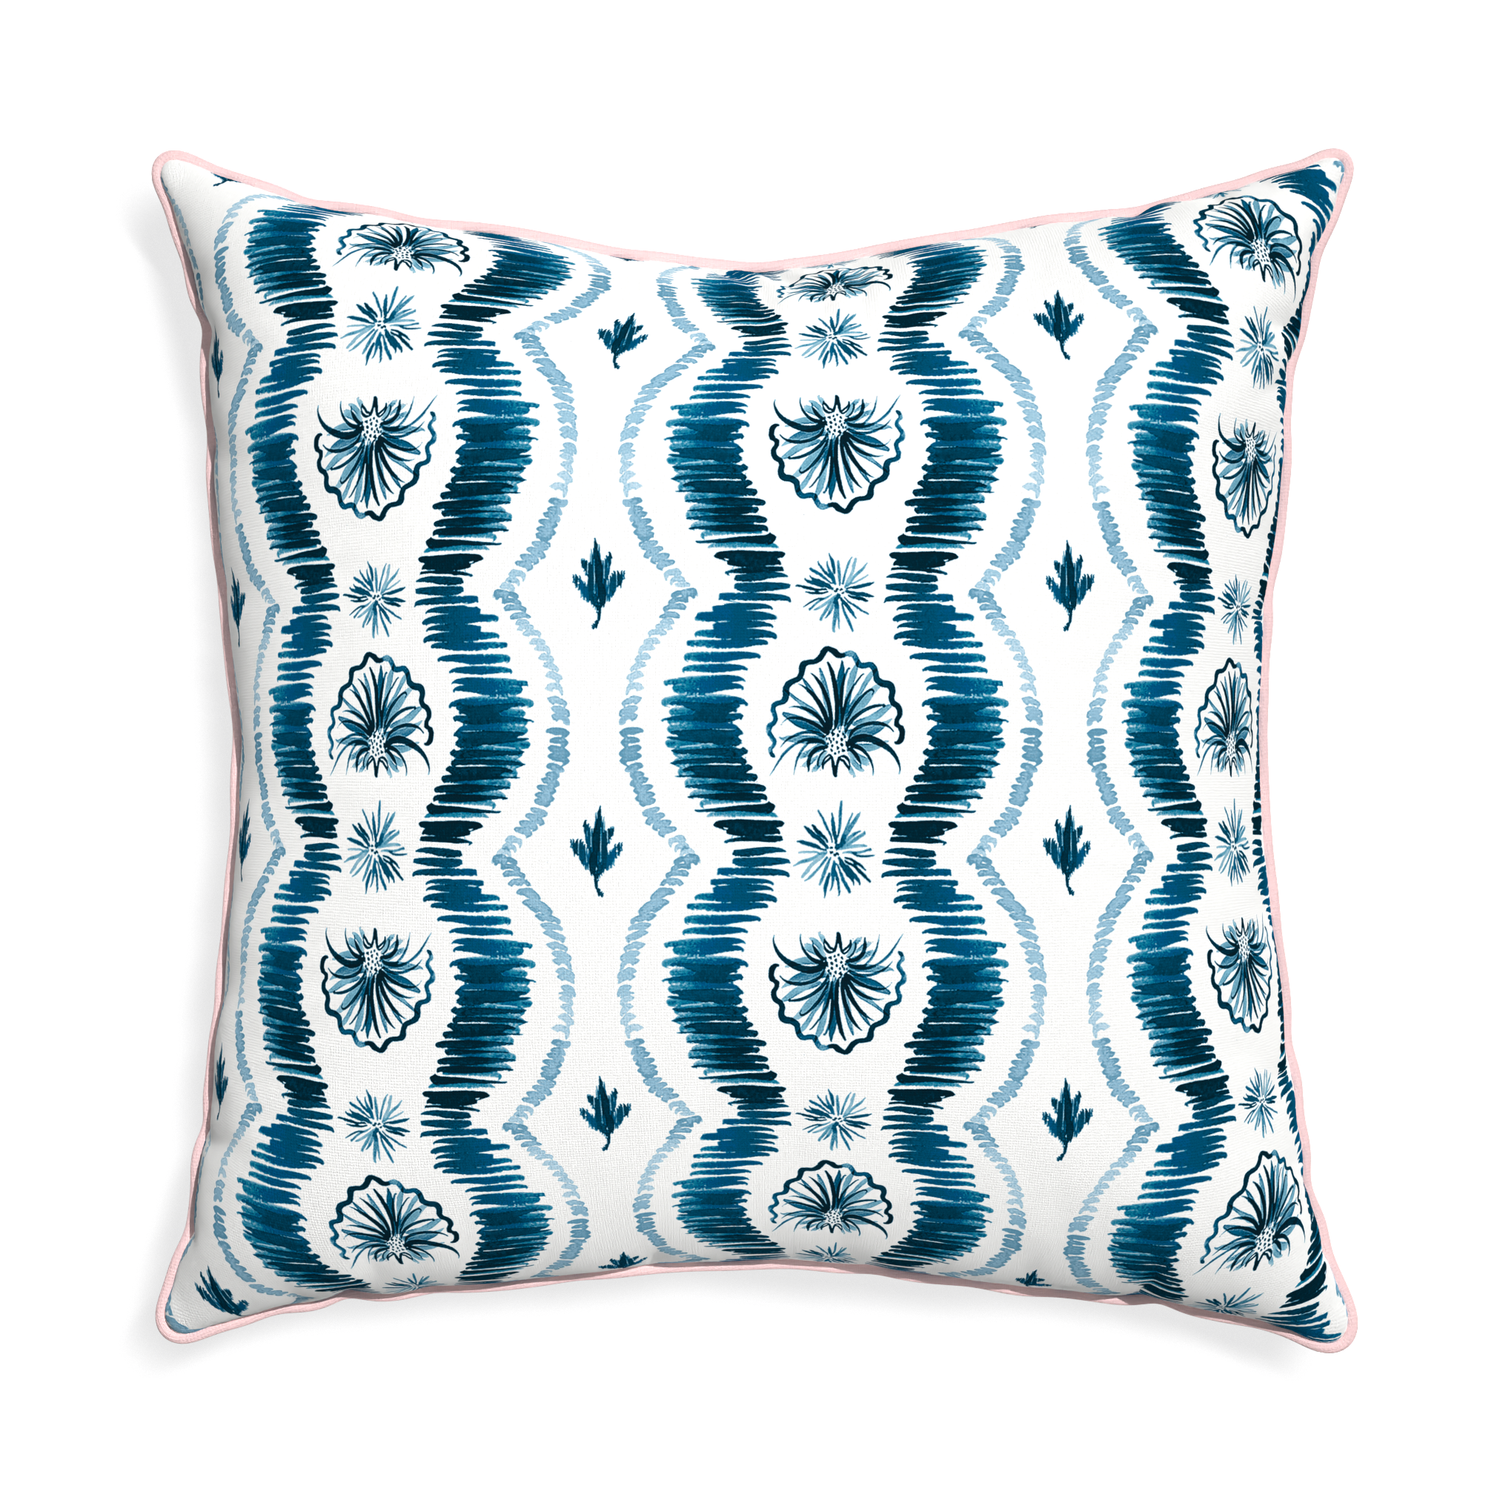 Euro-sham alice custom blue ikatpillow with petal piping on white background